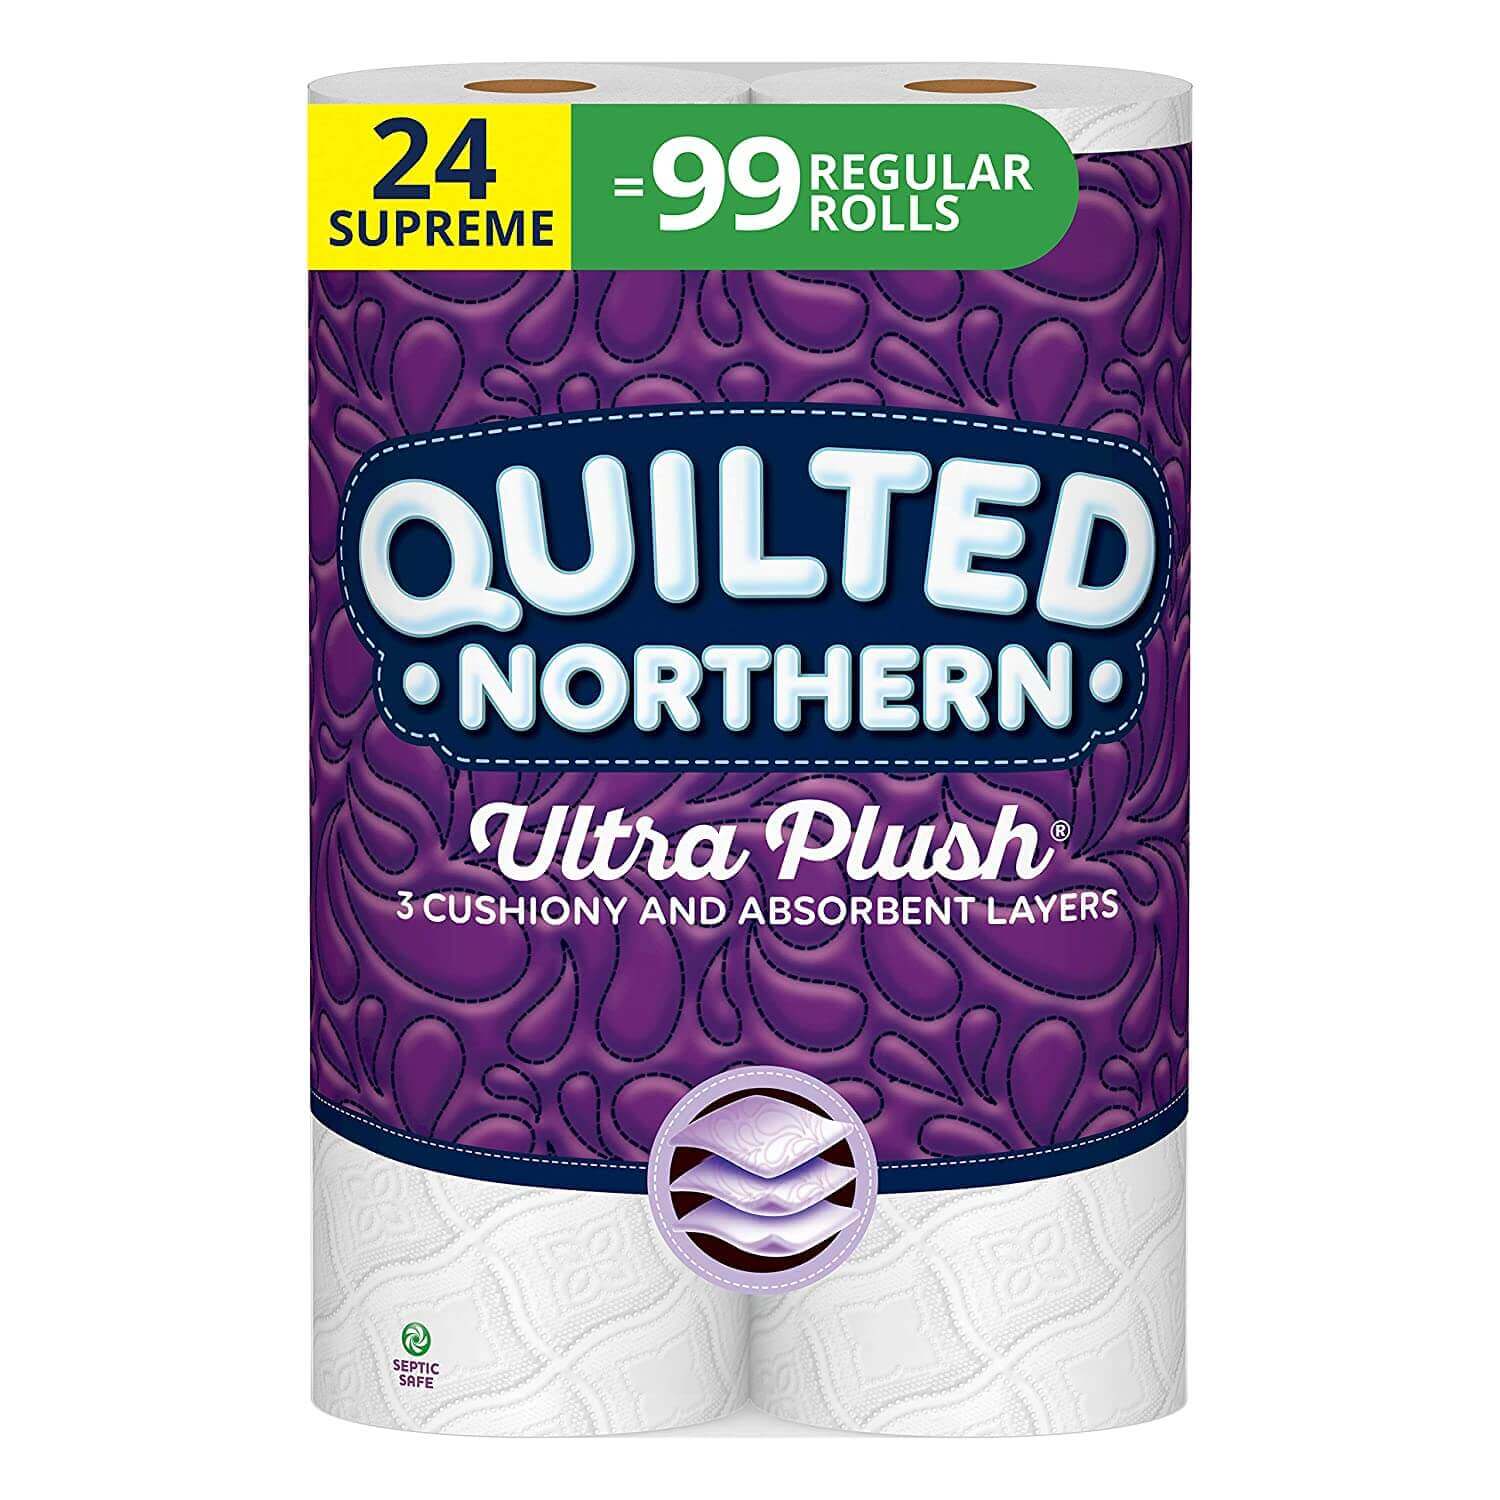 Quilted Northern Ultra Plush Septic Safe Toilet Paper